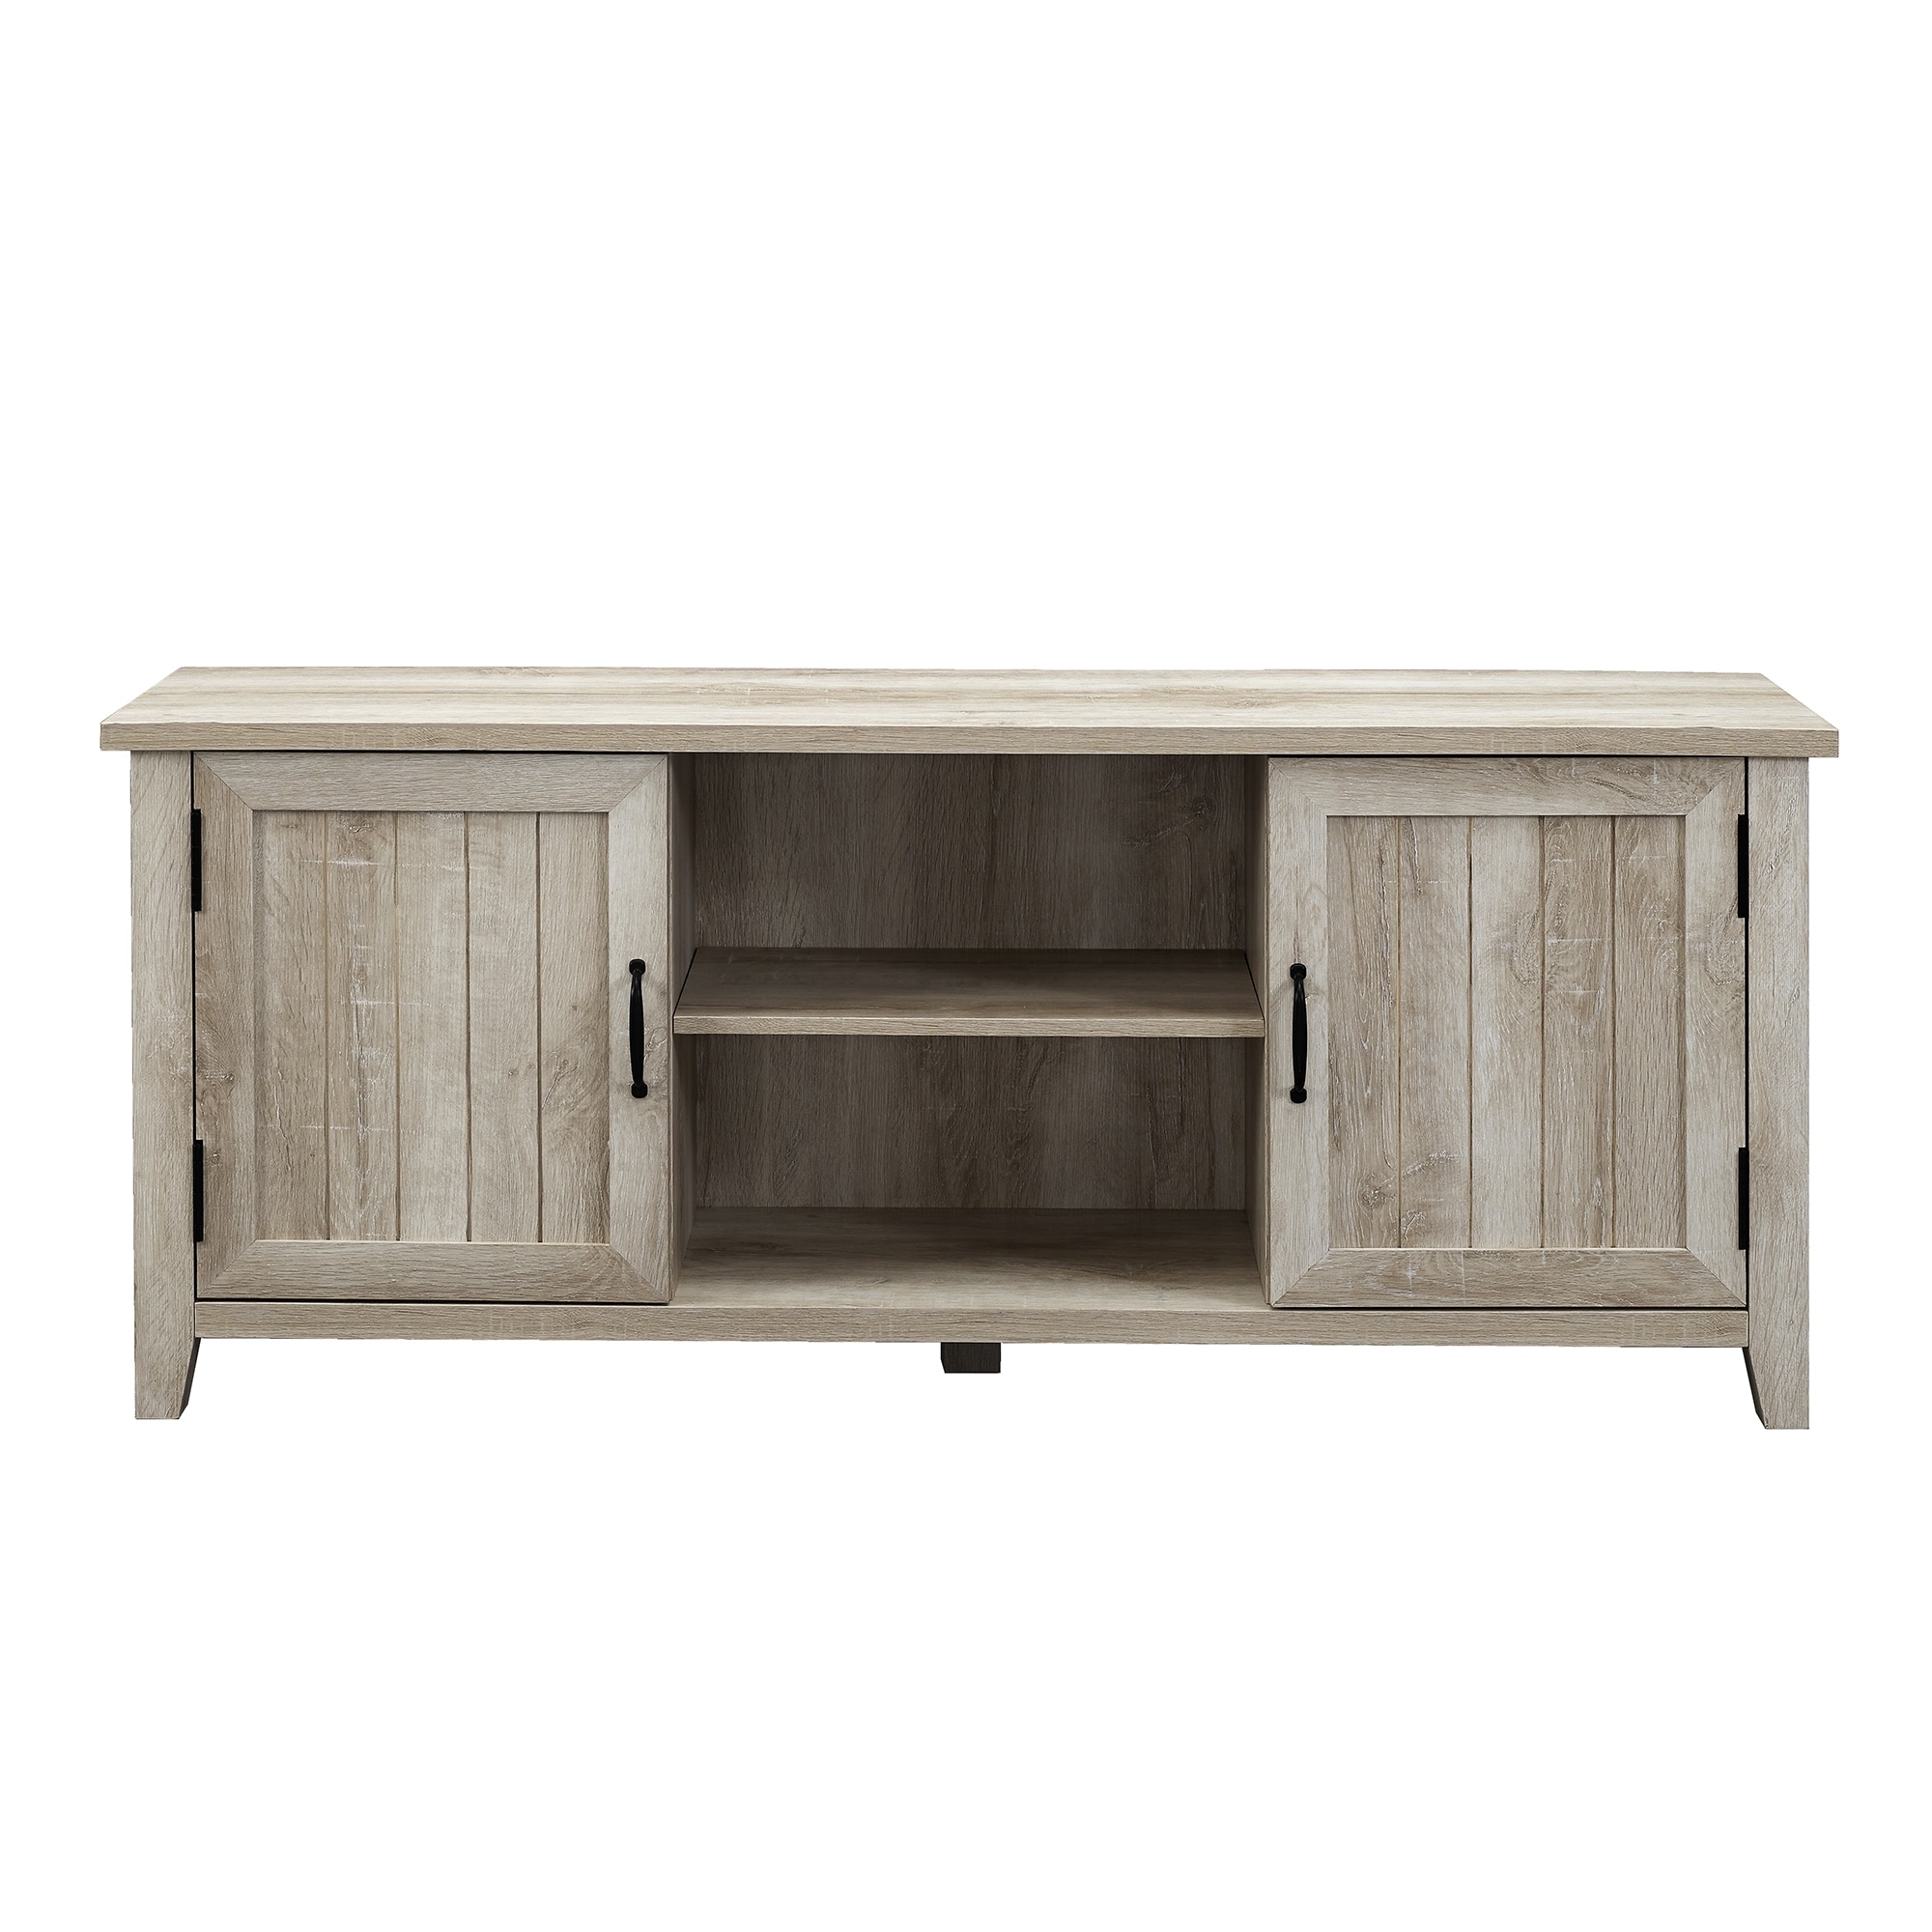 Details about   The Gray Barn Wind Gap Groove Door TV Stand Console 